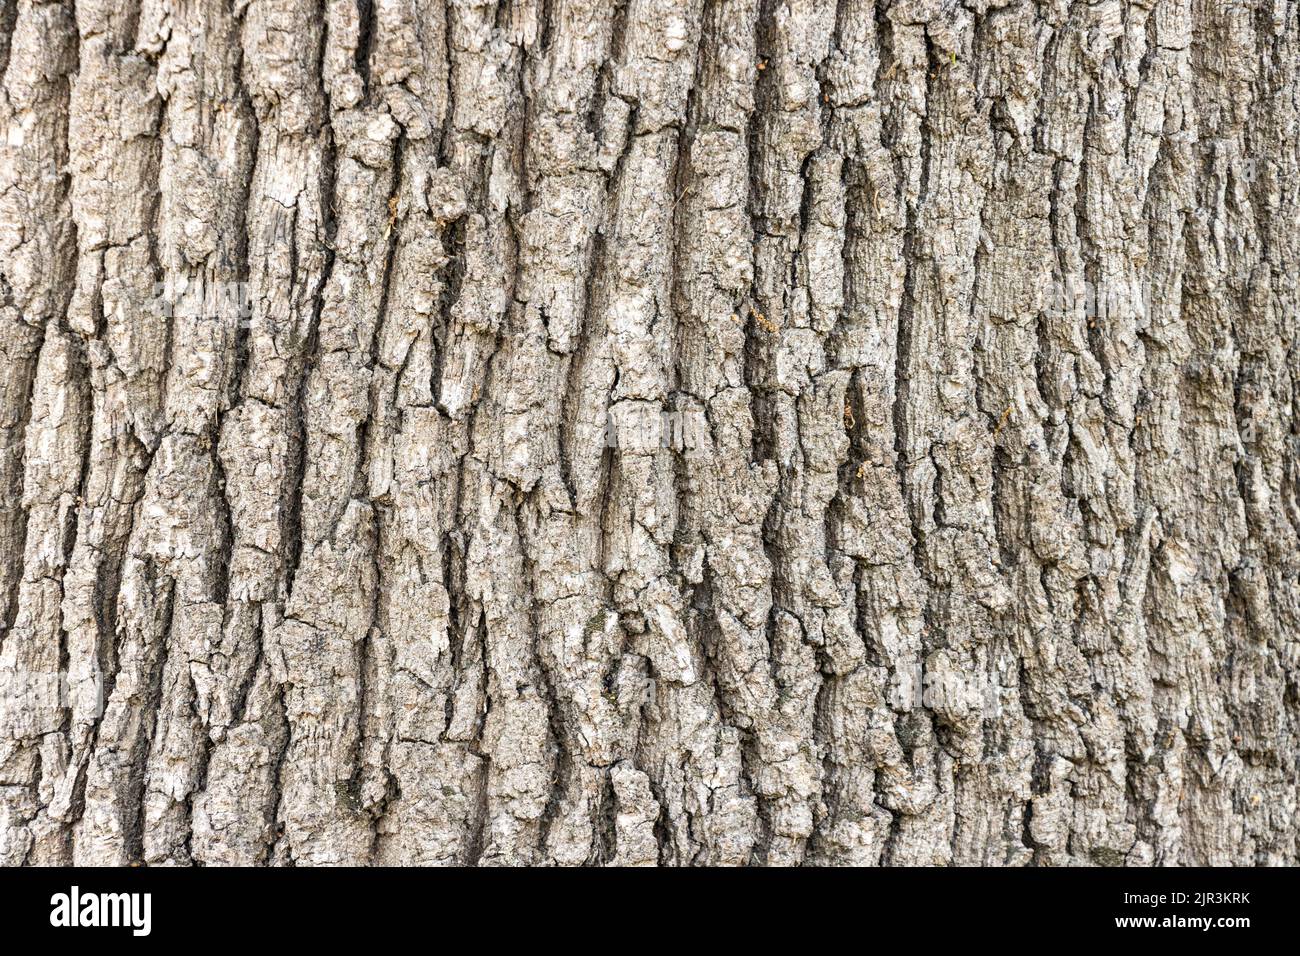 Bark of a tree texture background Stock Photo